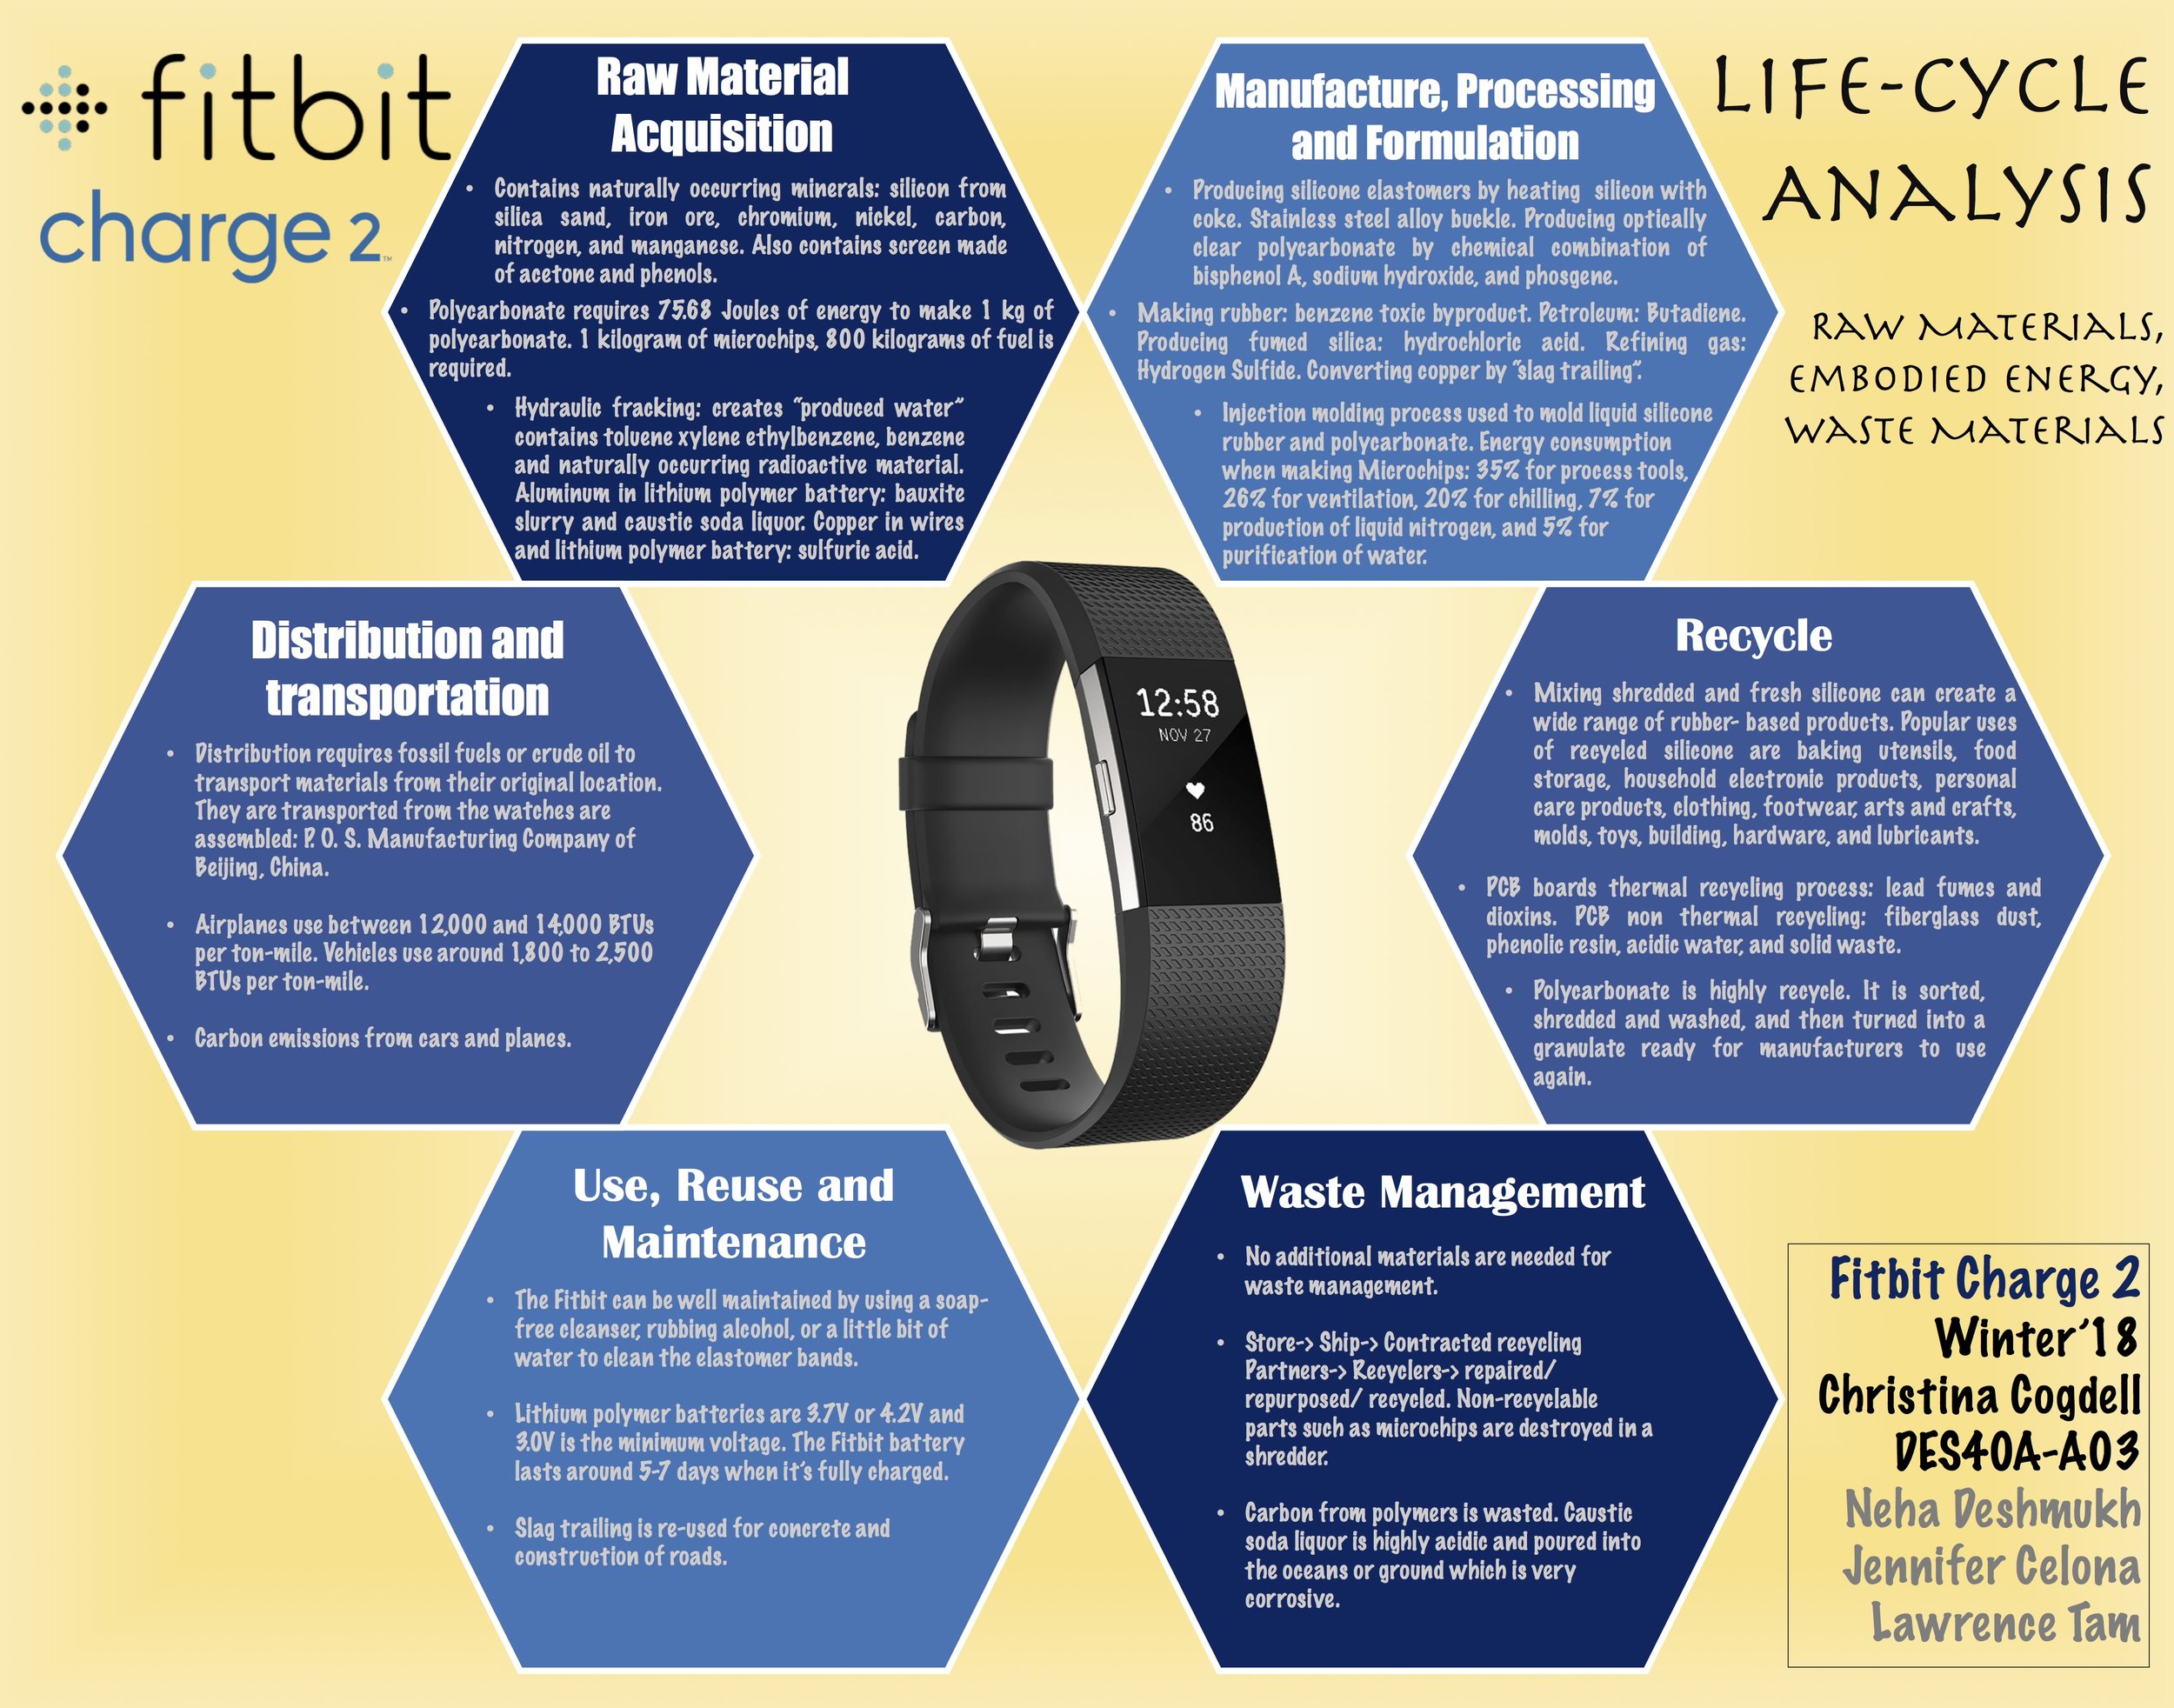 Fitbit Charge 2 — Design Life-Cycle